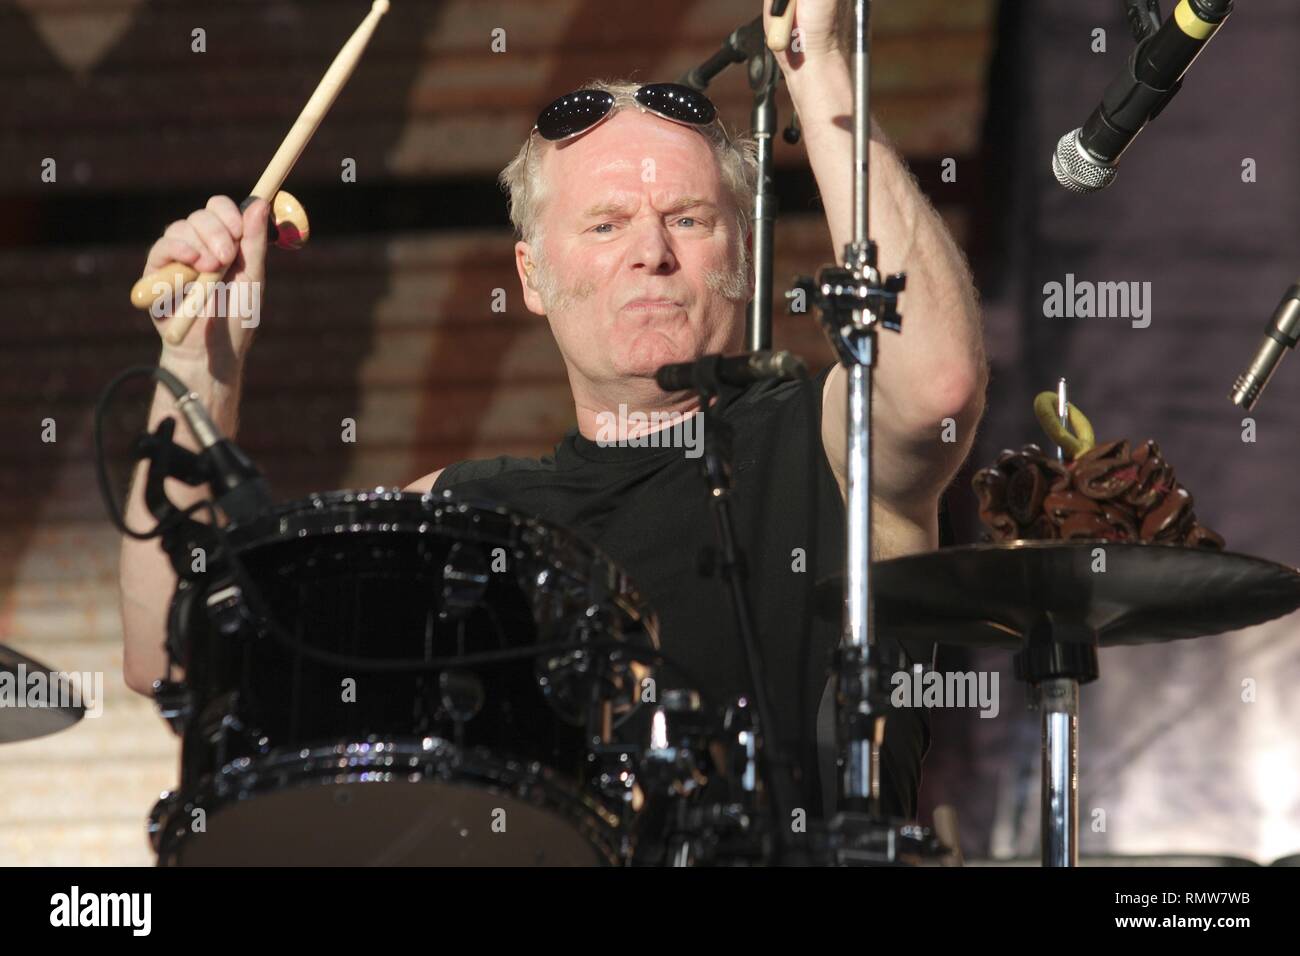 Drummer Martin Chambers of British rock band The Pretenders is shown performing on stage during a 'live' concert appearance at Farm Aid 2008. Stock Photo